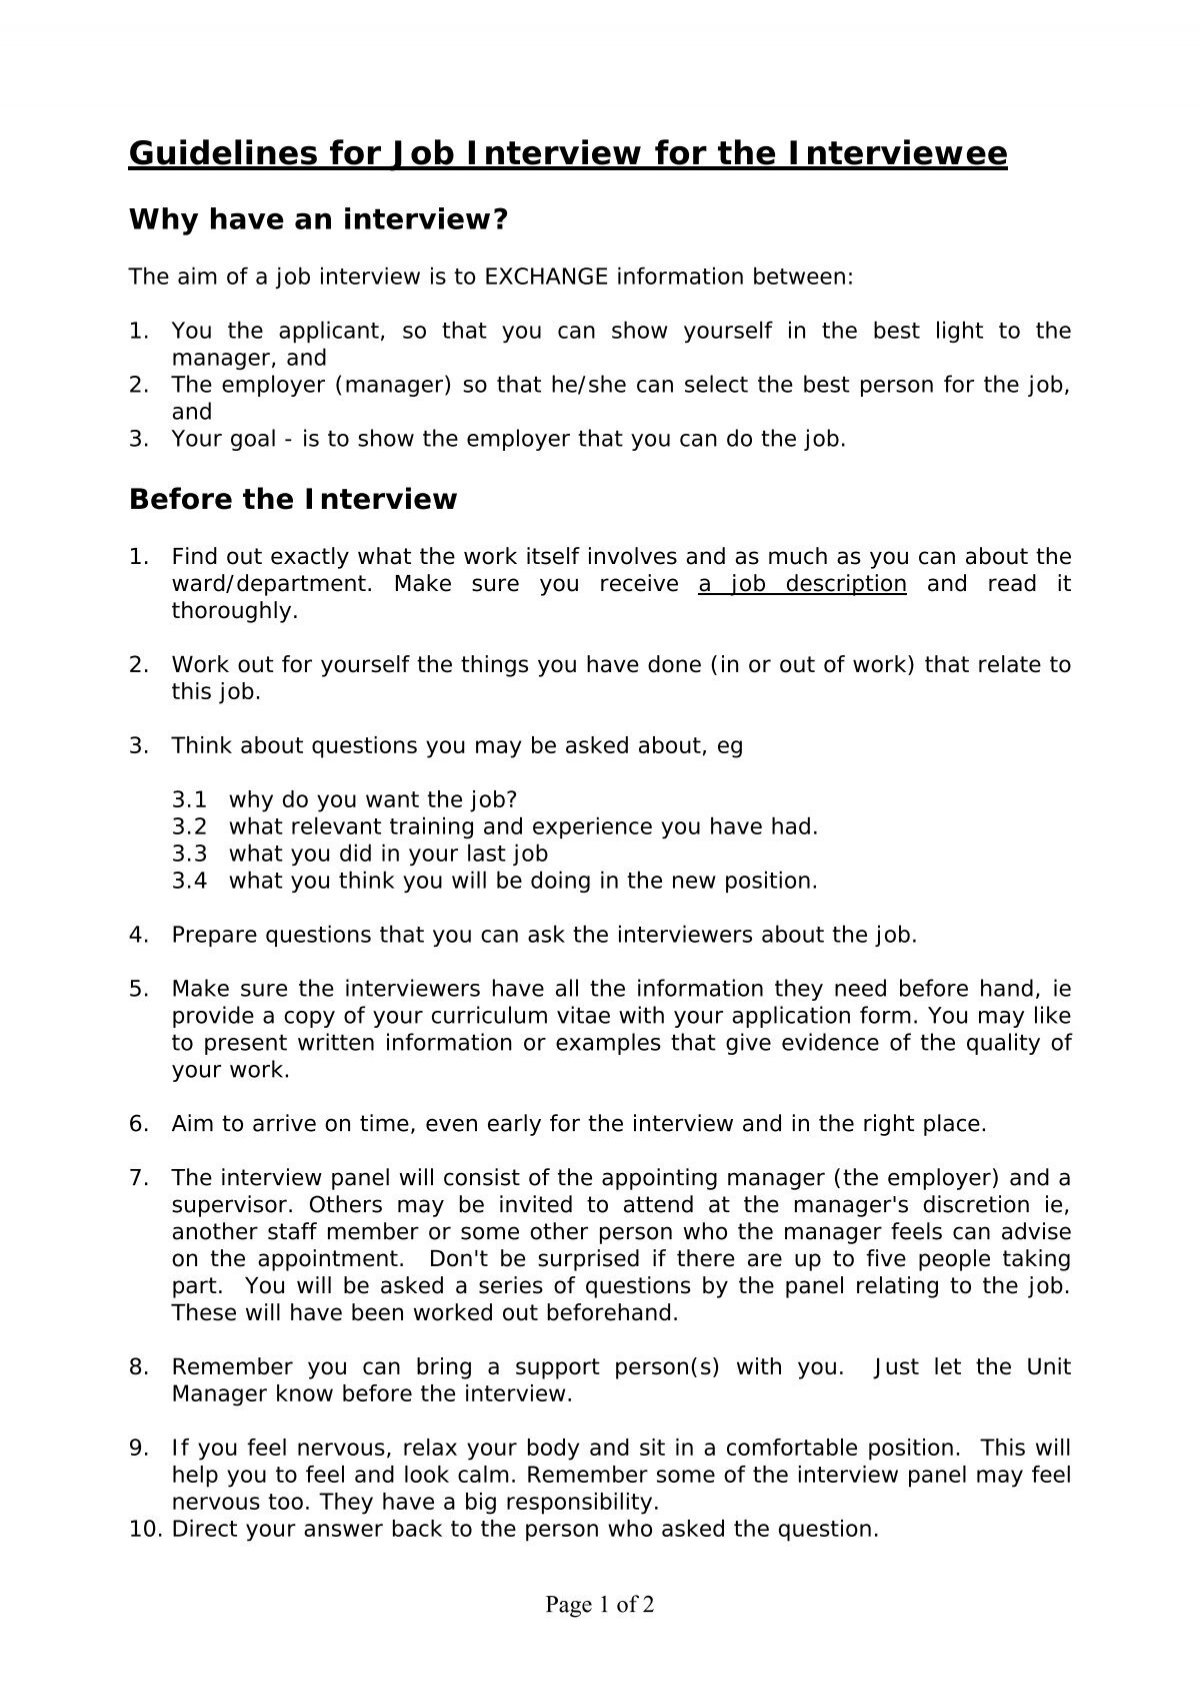 Guidelines for Job Interview for the Interviewee